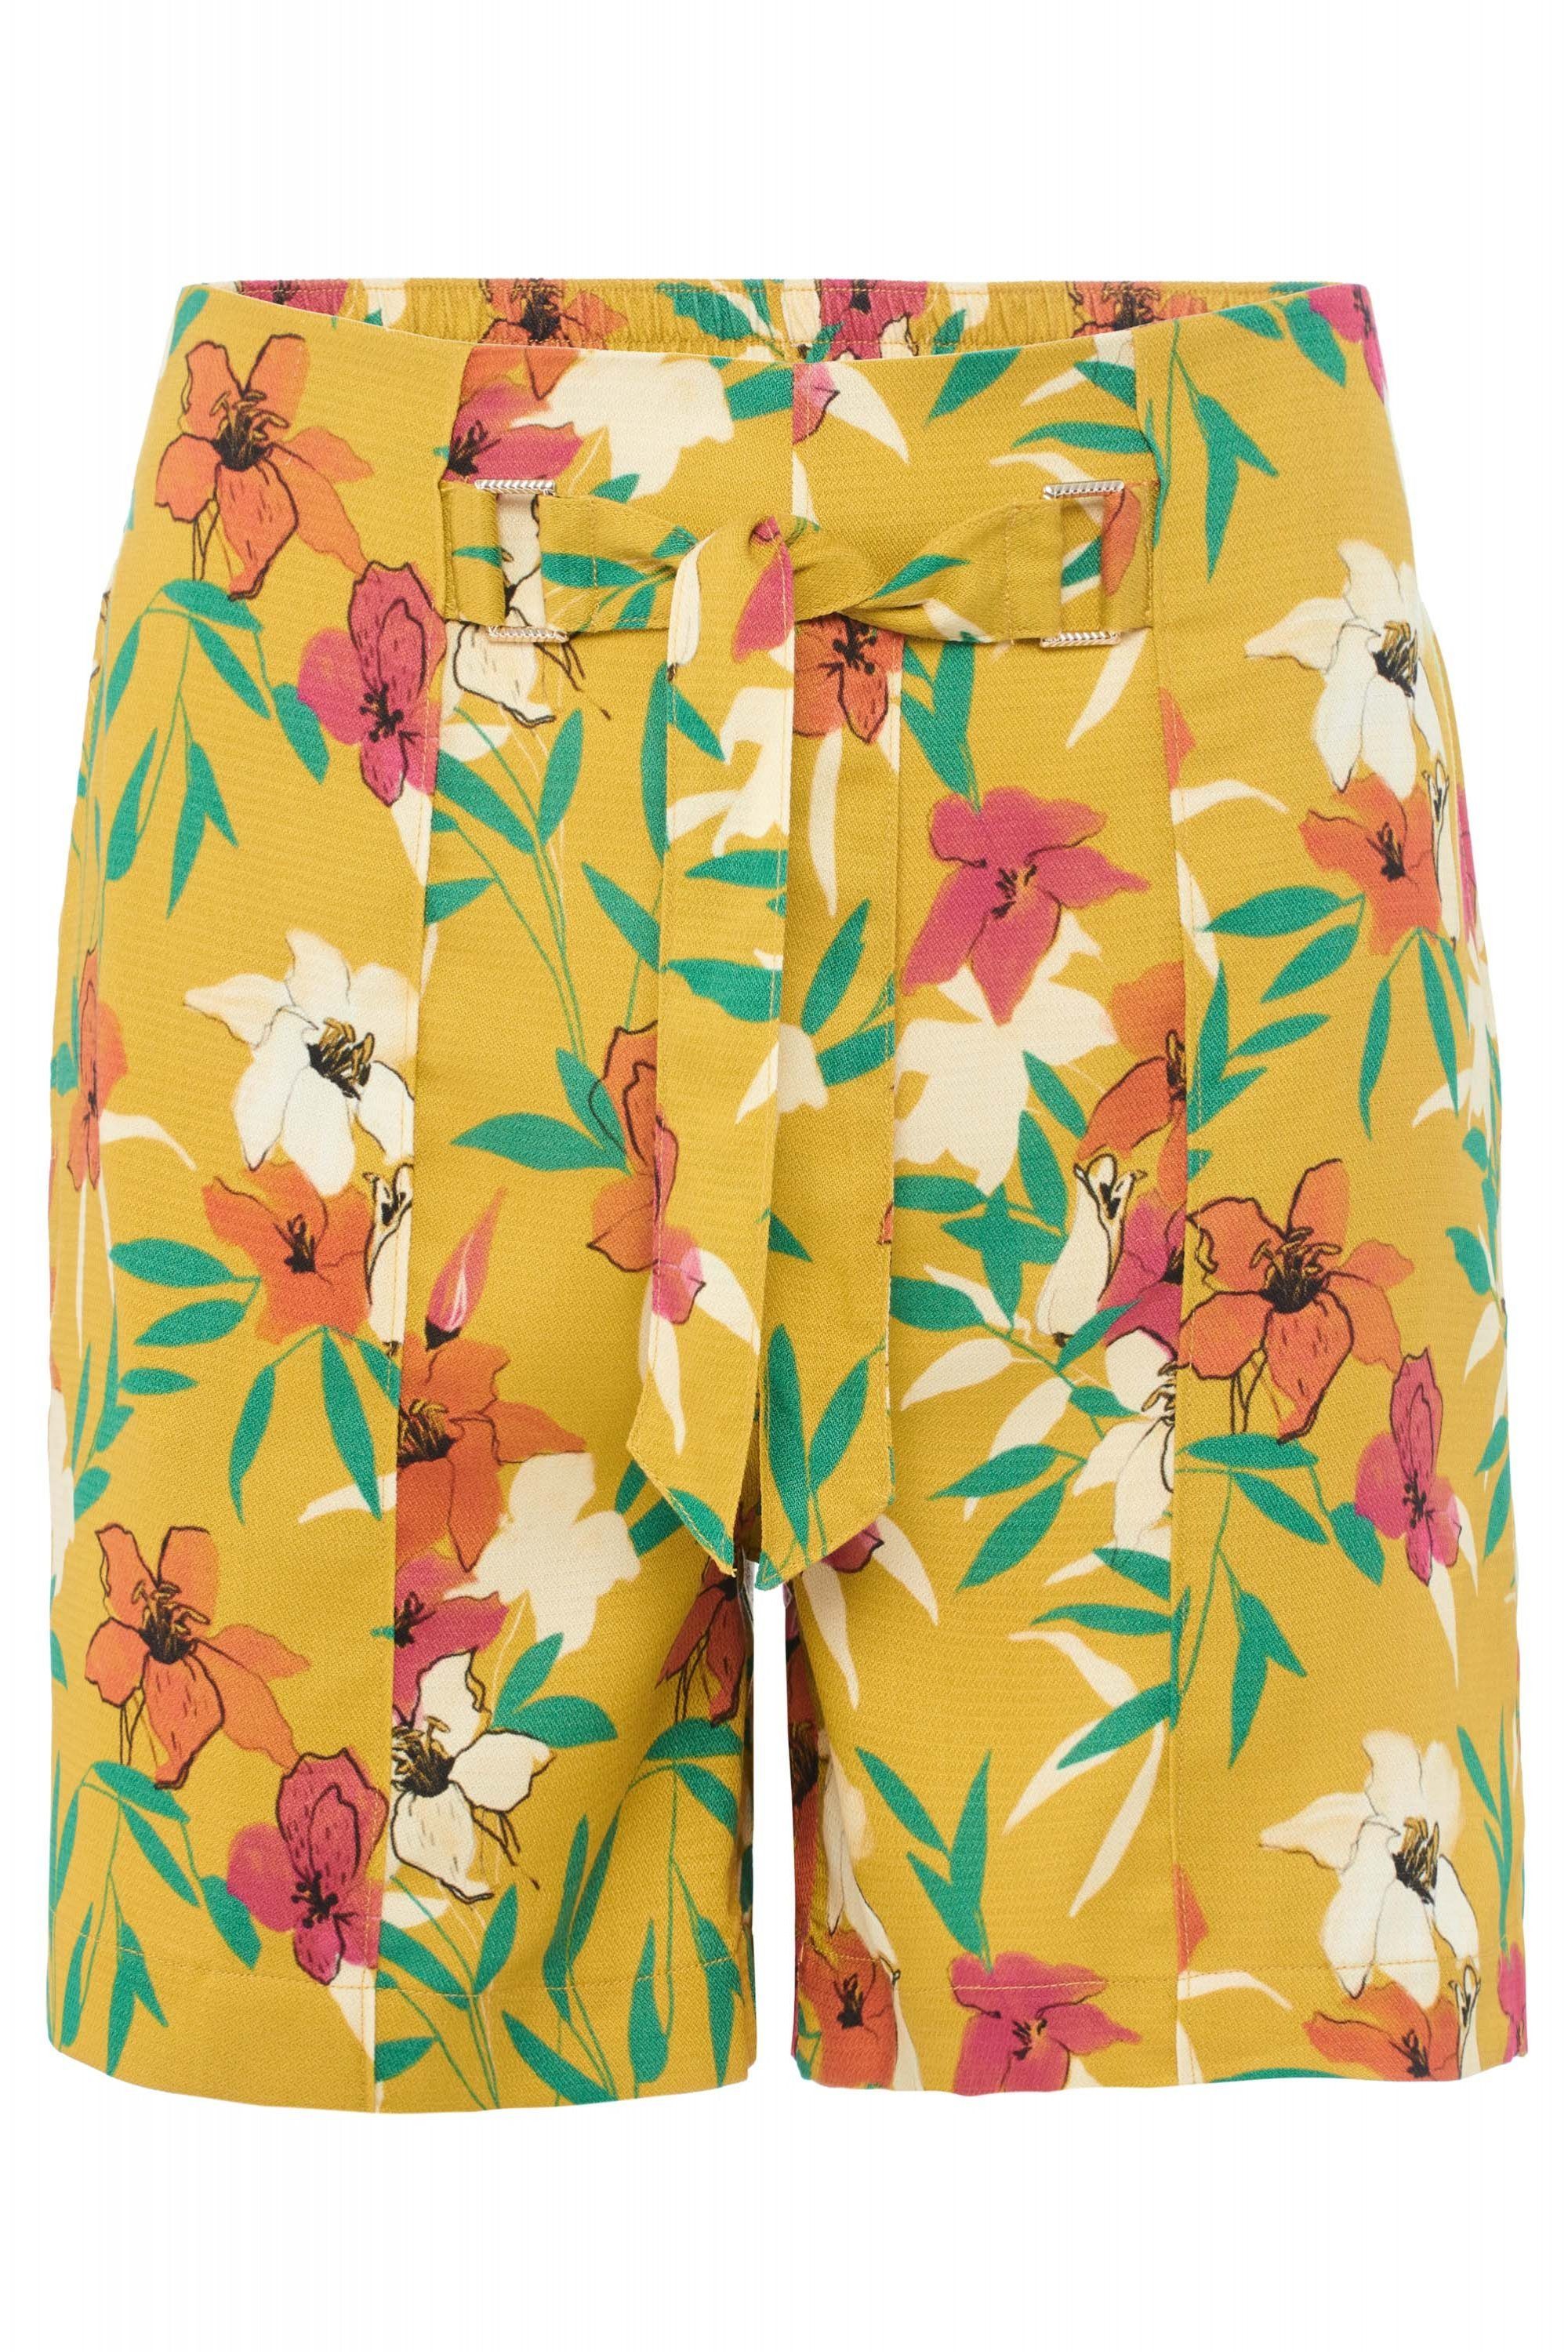 Salsa JEANS yellow 122813.4048 print SALSA SHORTS floral Stretch-Jeans